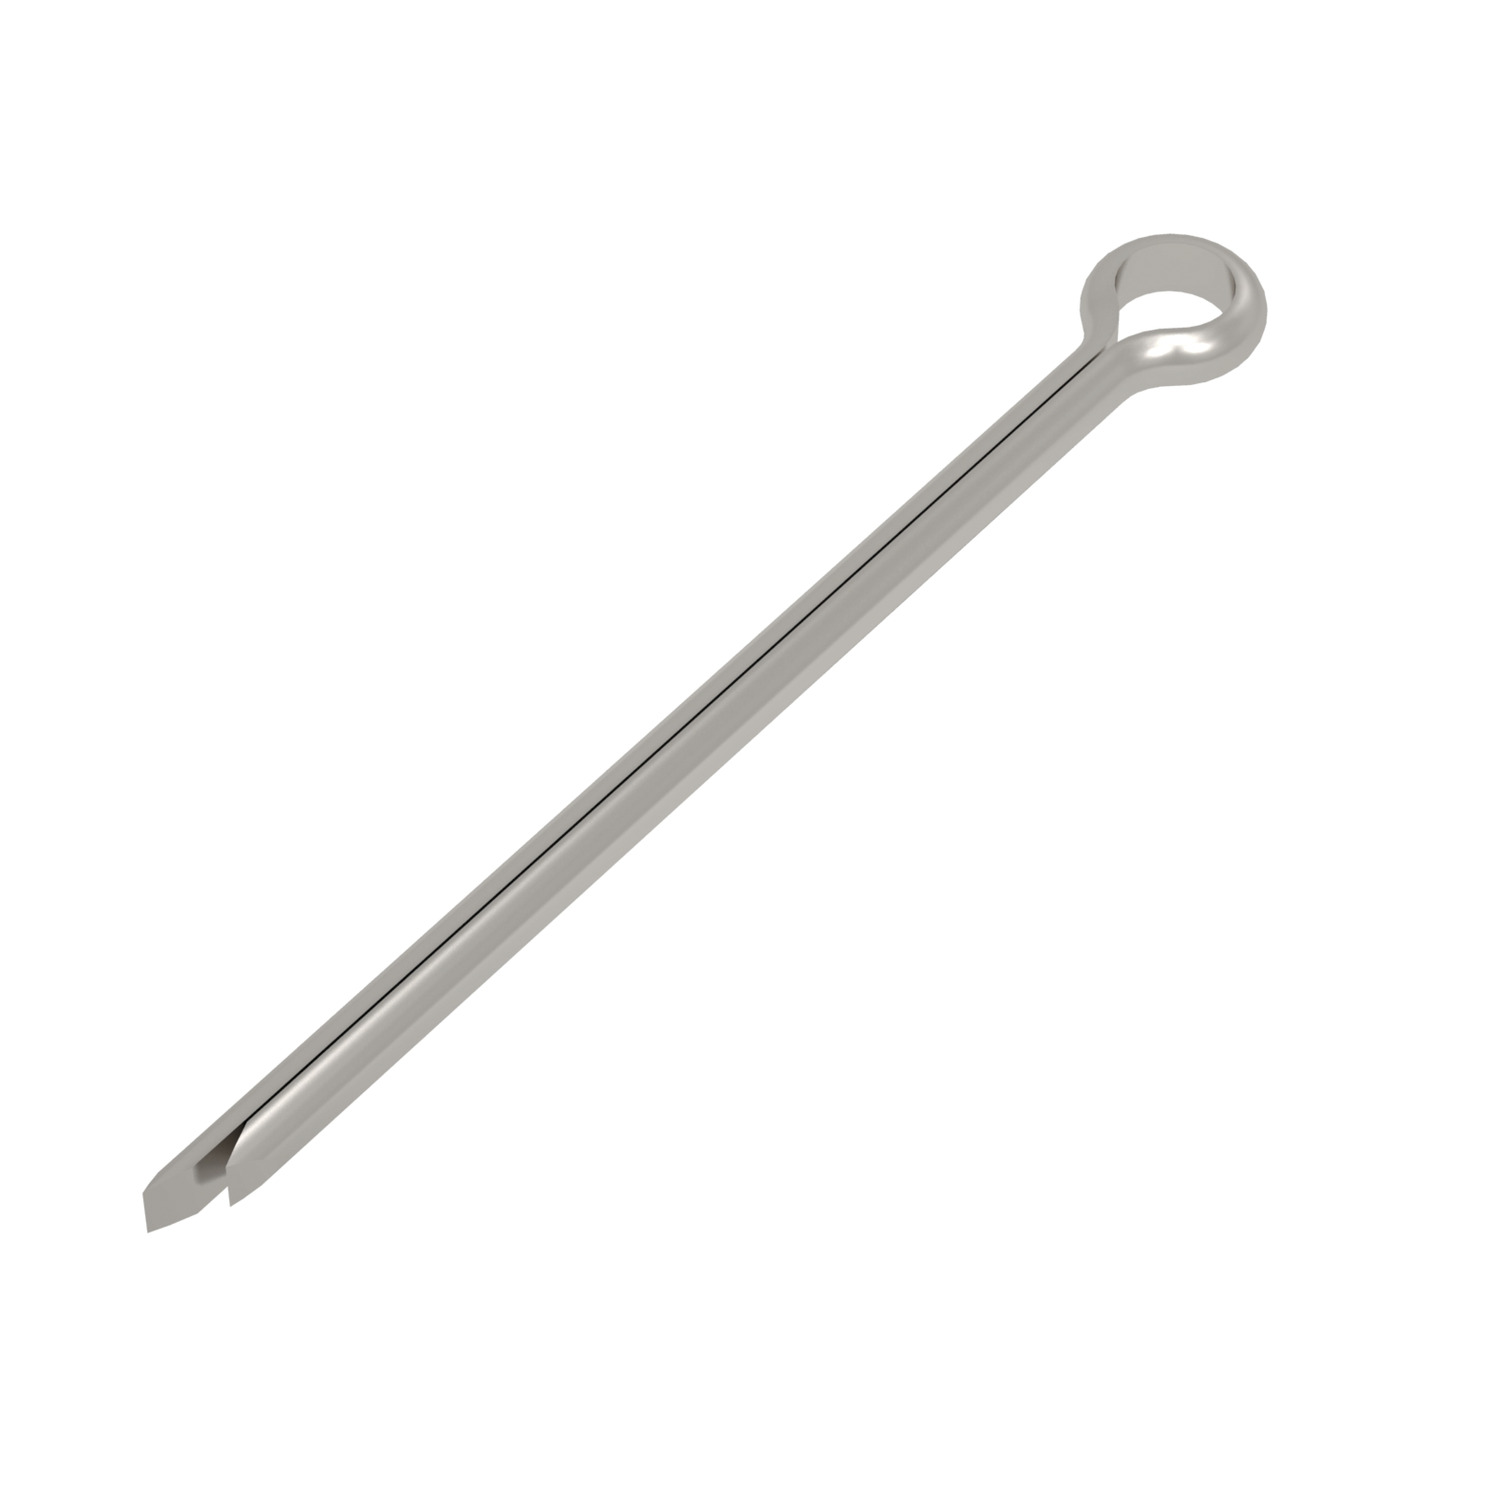 Product P1241, Stainless Cotter Pins  / 